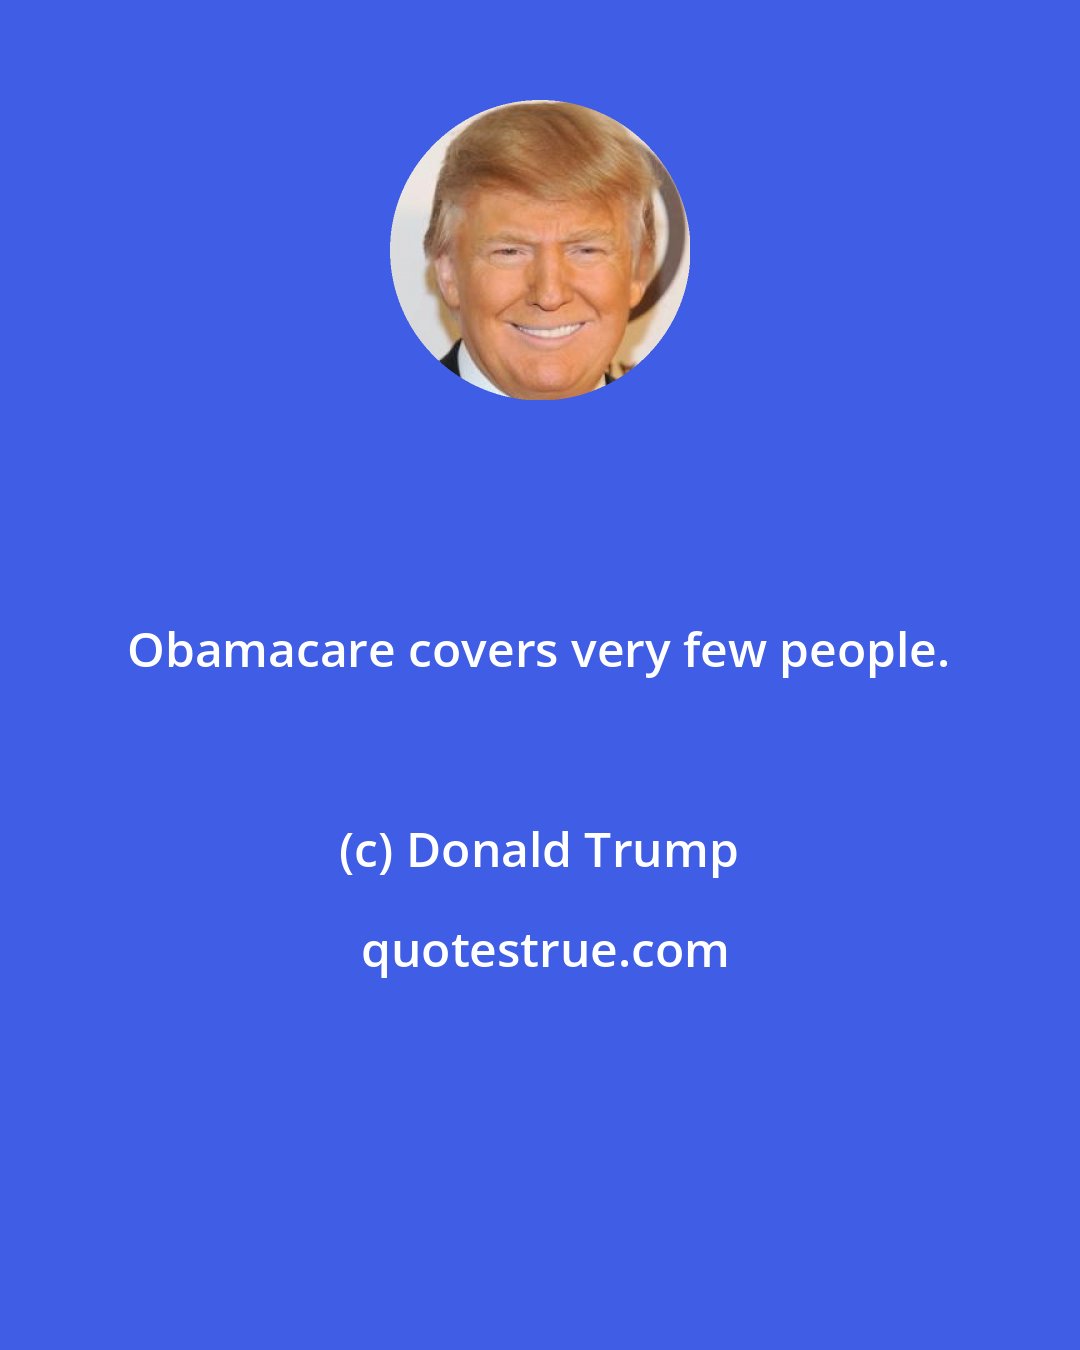 Donald Trump: Obamacare covers very few people.